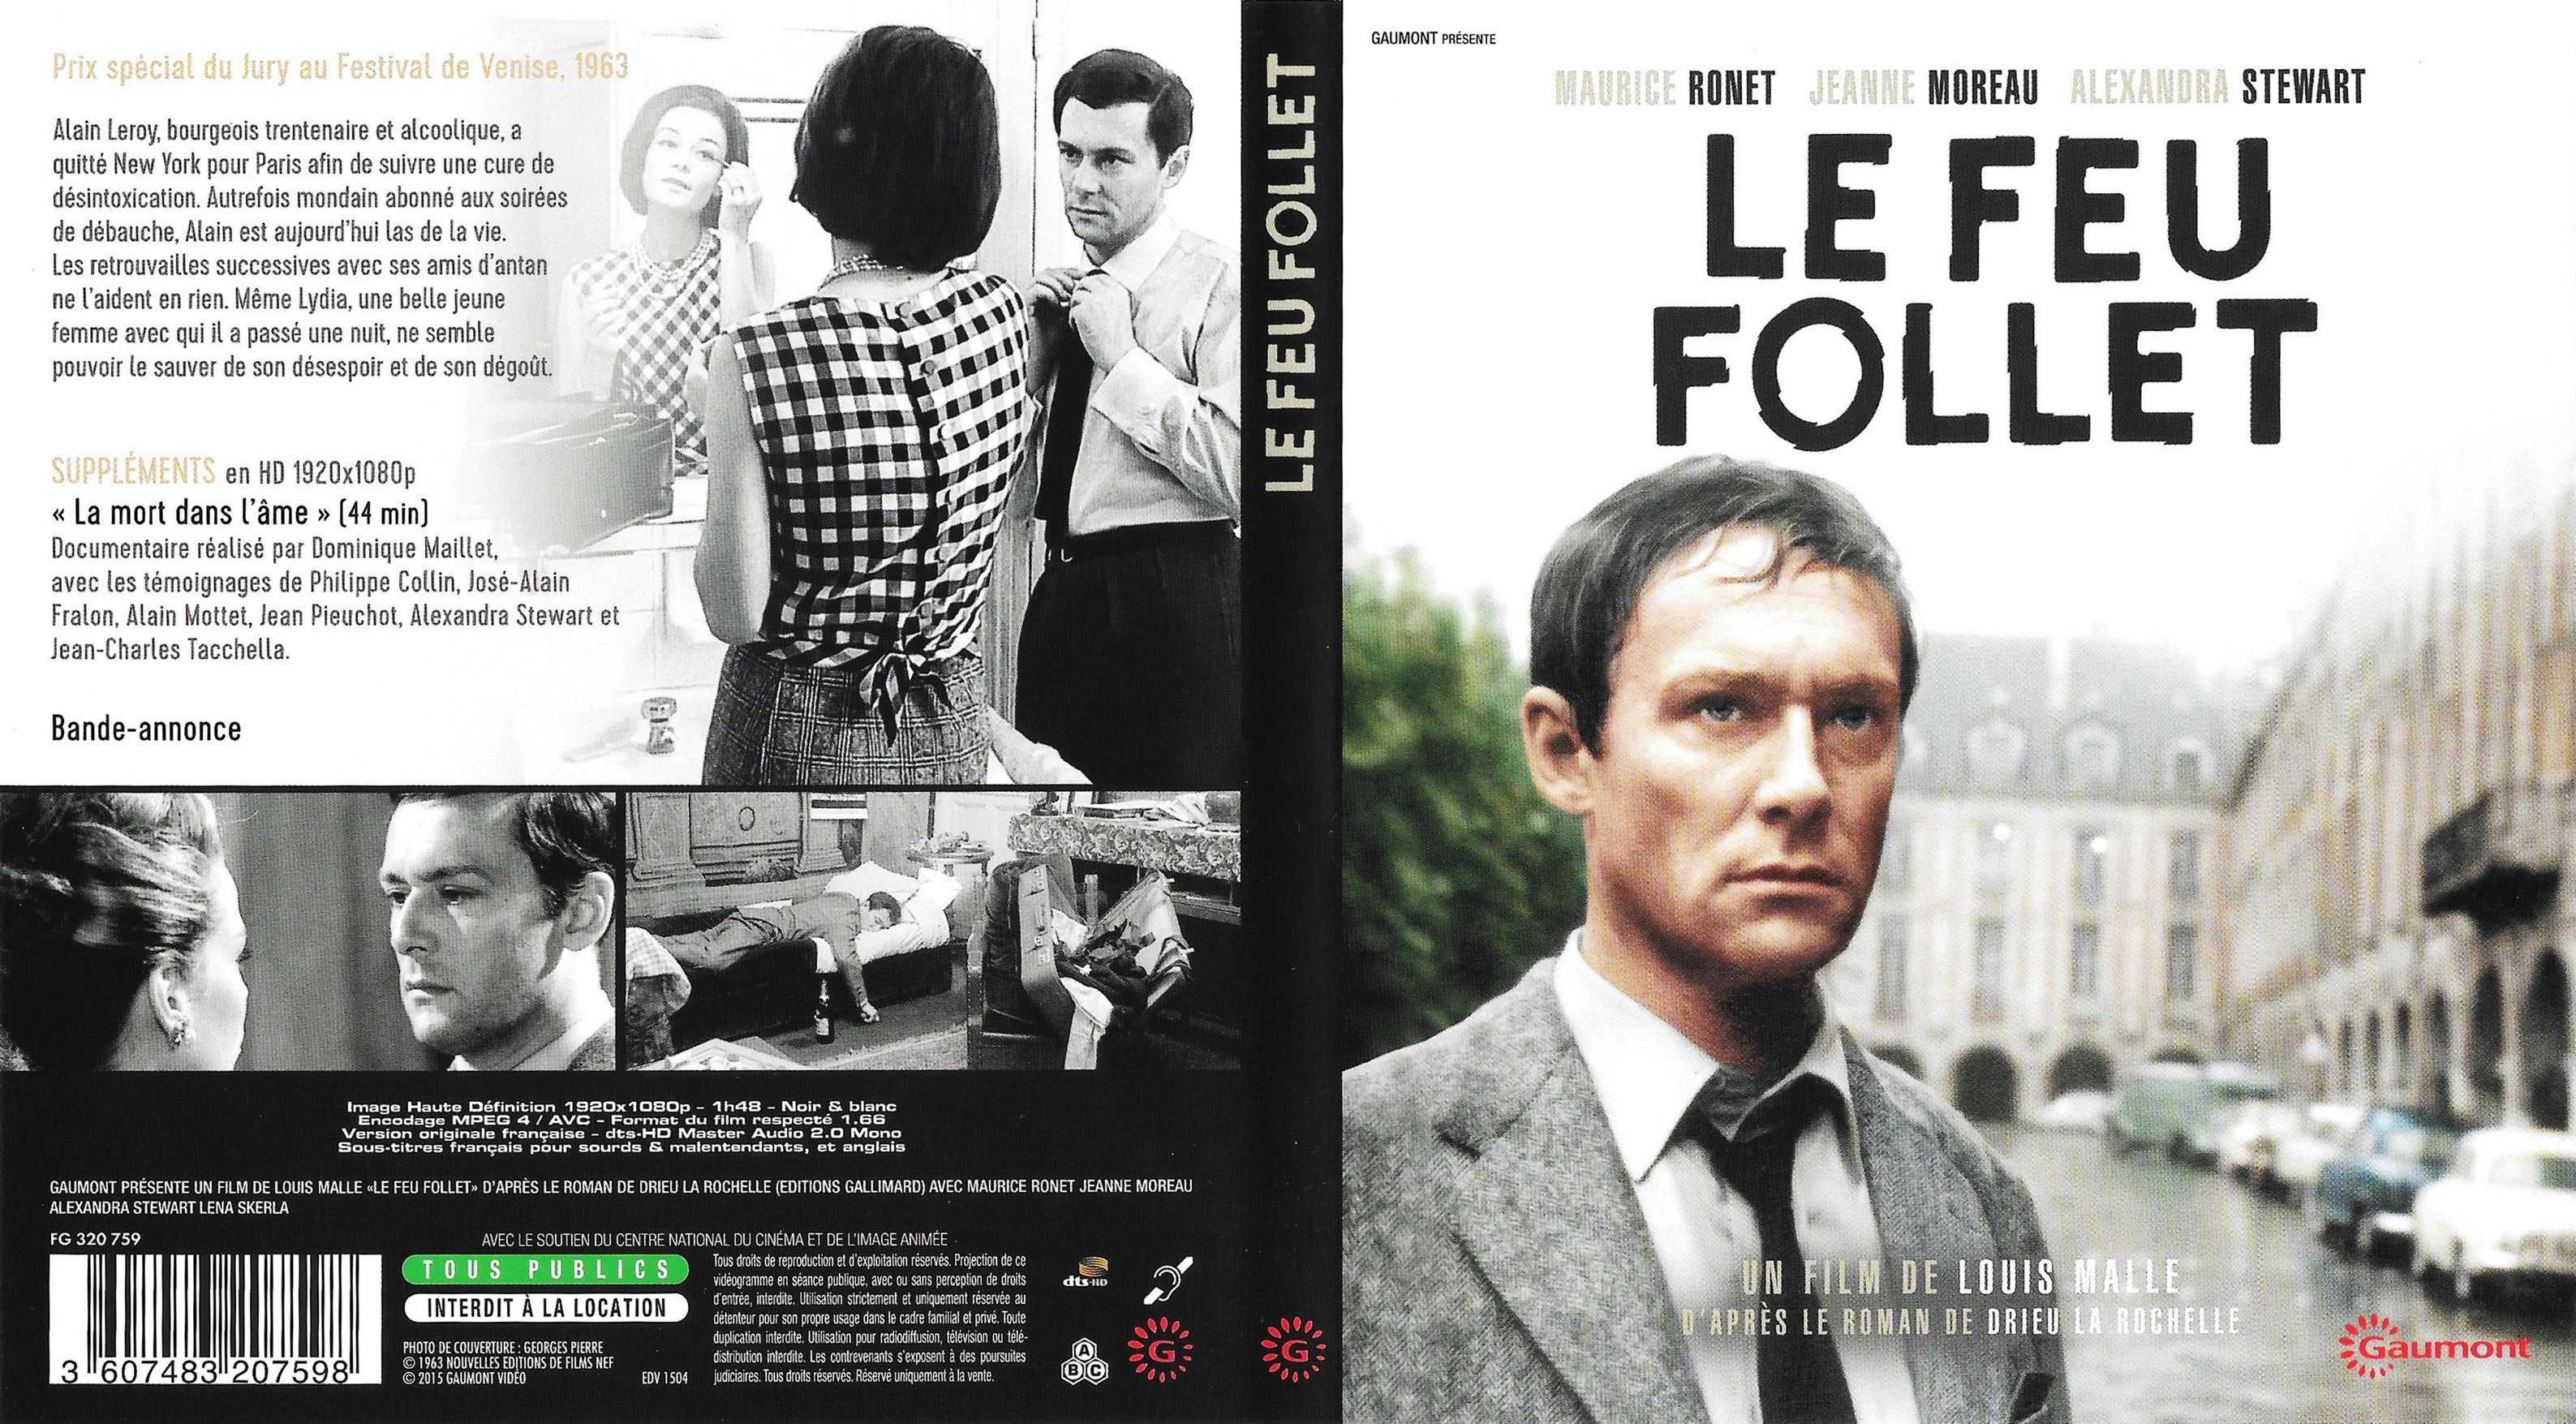 CDJapan : Le Feu Follet (The Fire Within) [Blu-ray] Movie Blu-ray